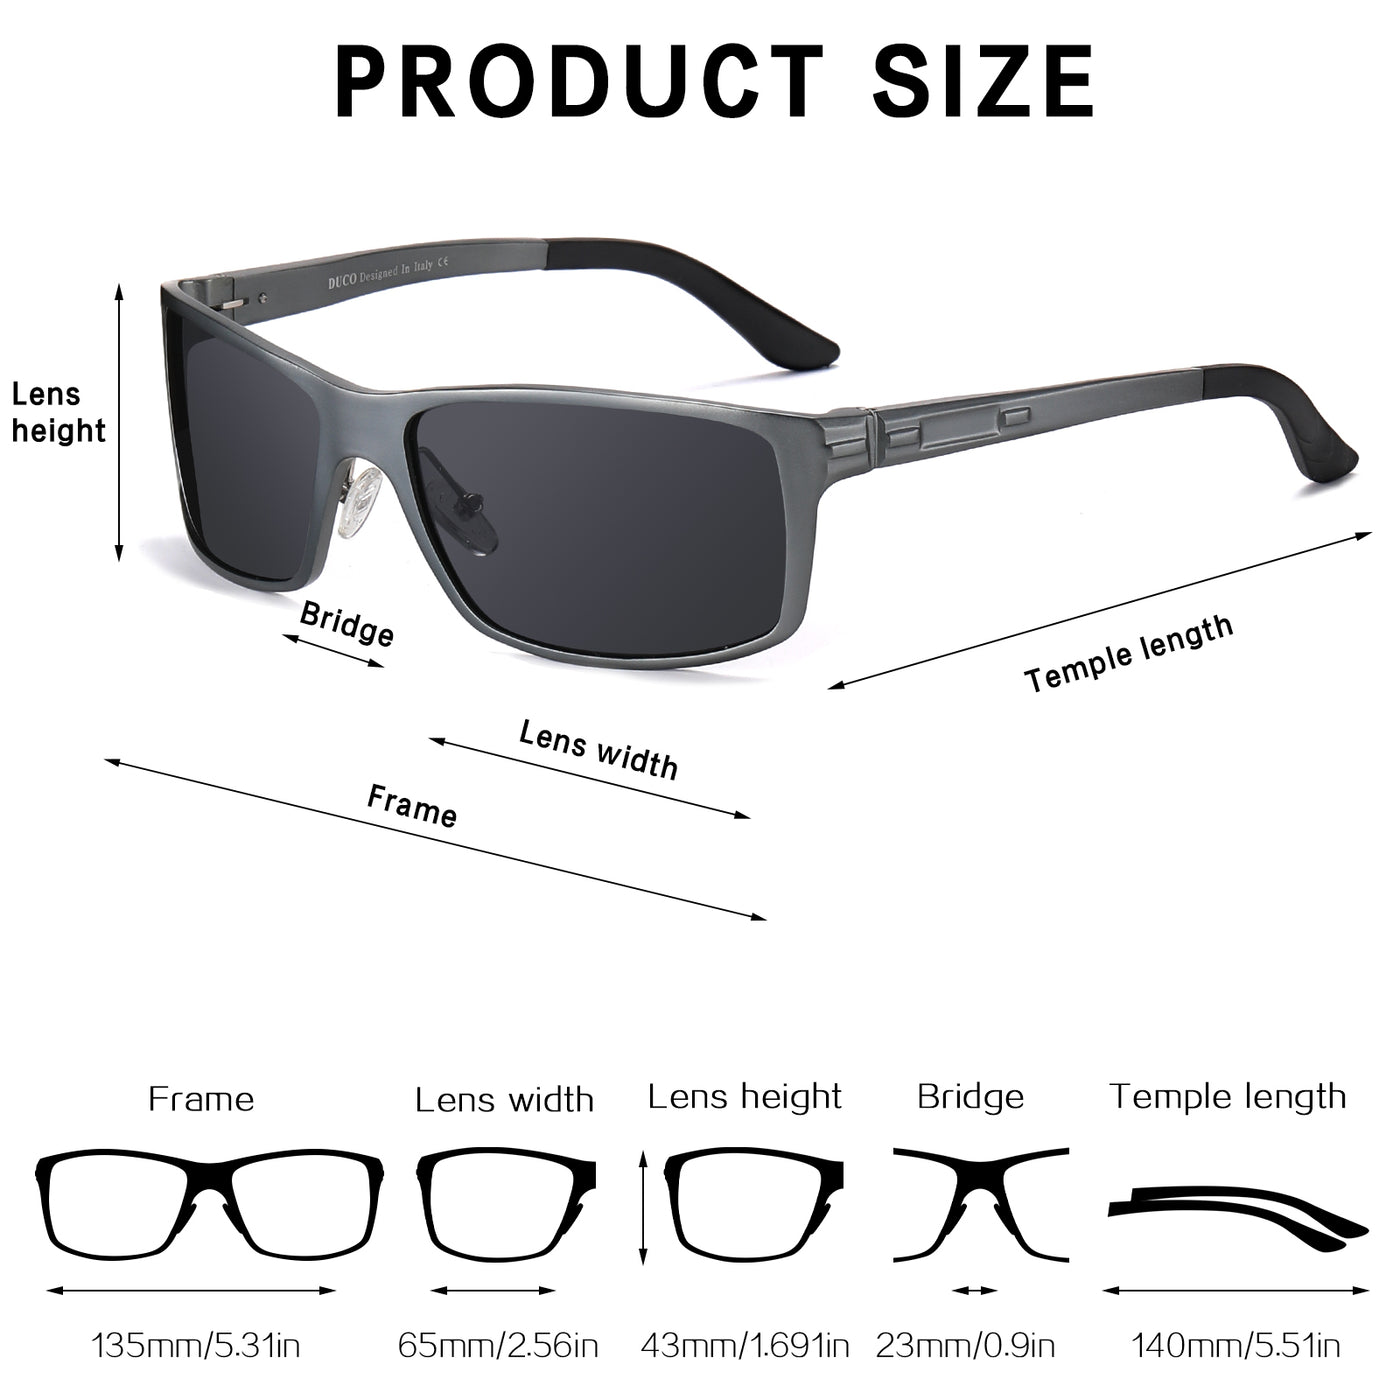 DUCO GLASSES-The right kind of shady DUCO Polarized Sports Sunglasses For Men Durable Metal Frame Sun Glasses For Driving Cycling Baseball Running Golf 9018 Duco Apparel & Accessories